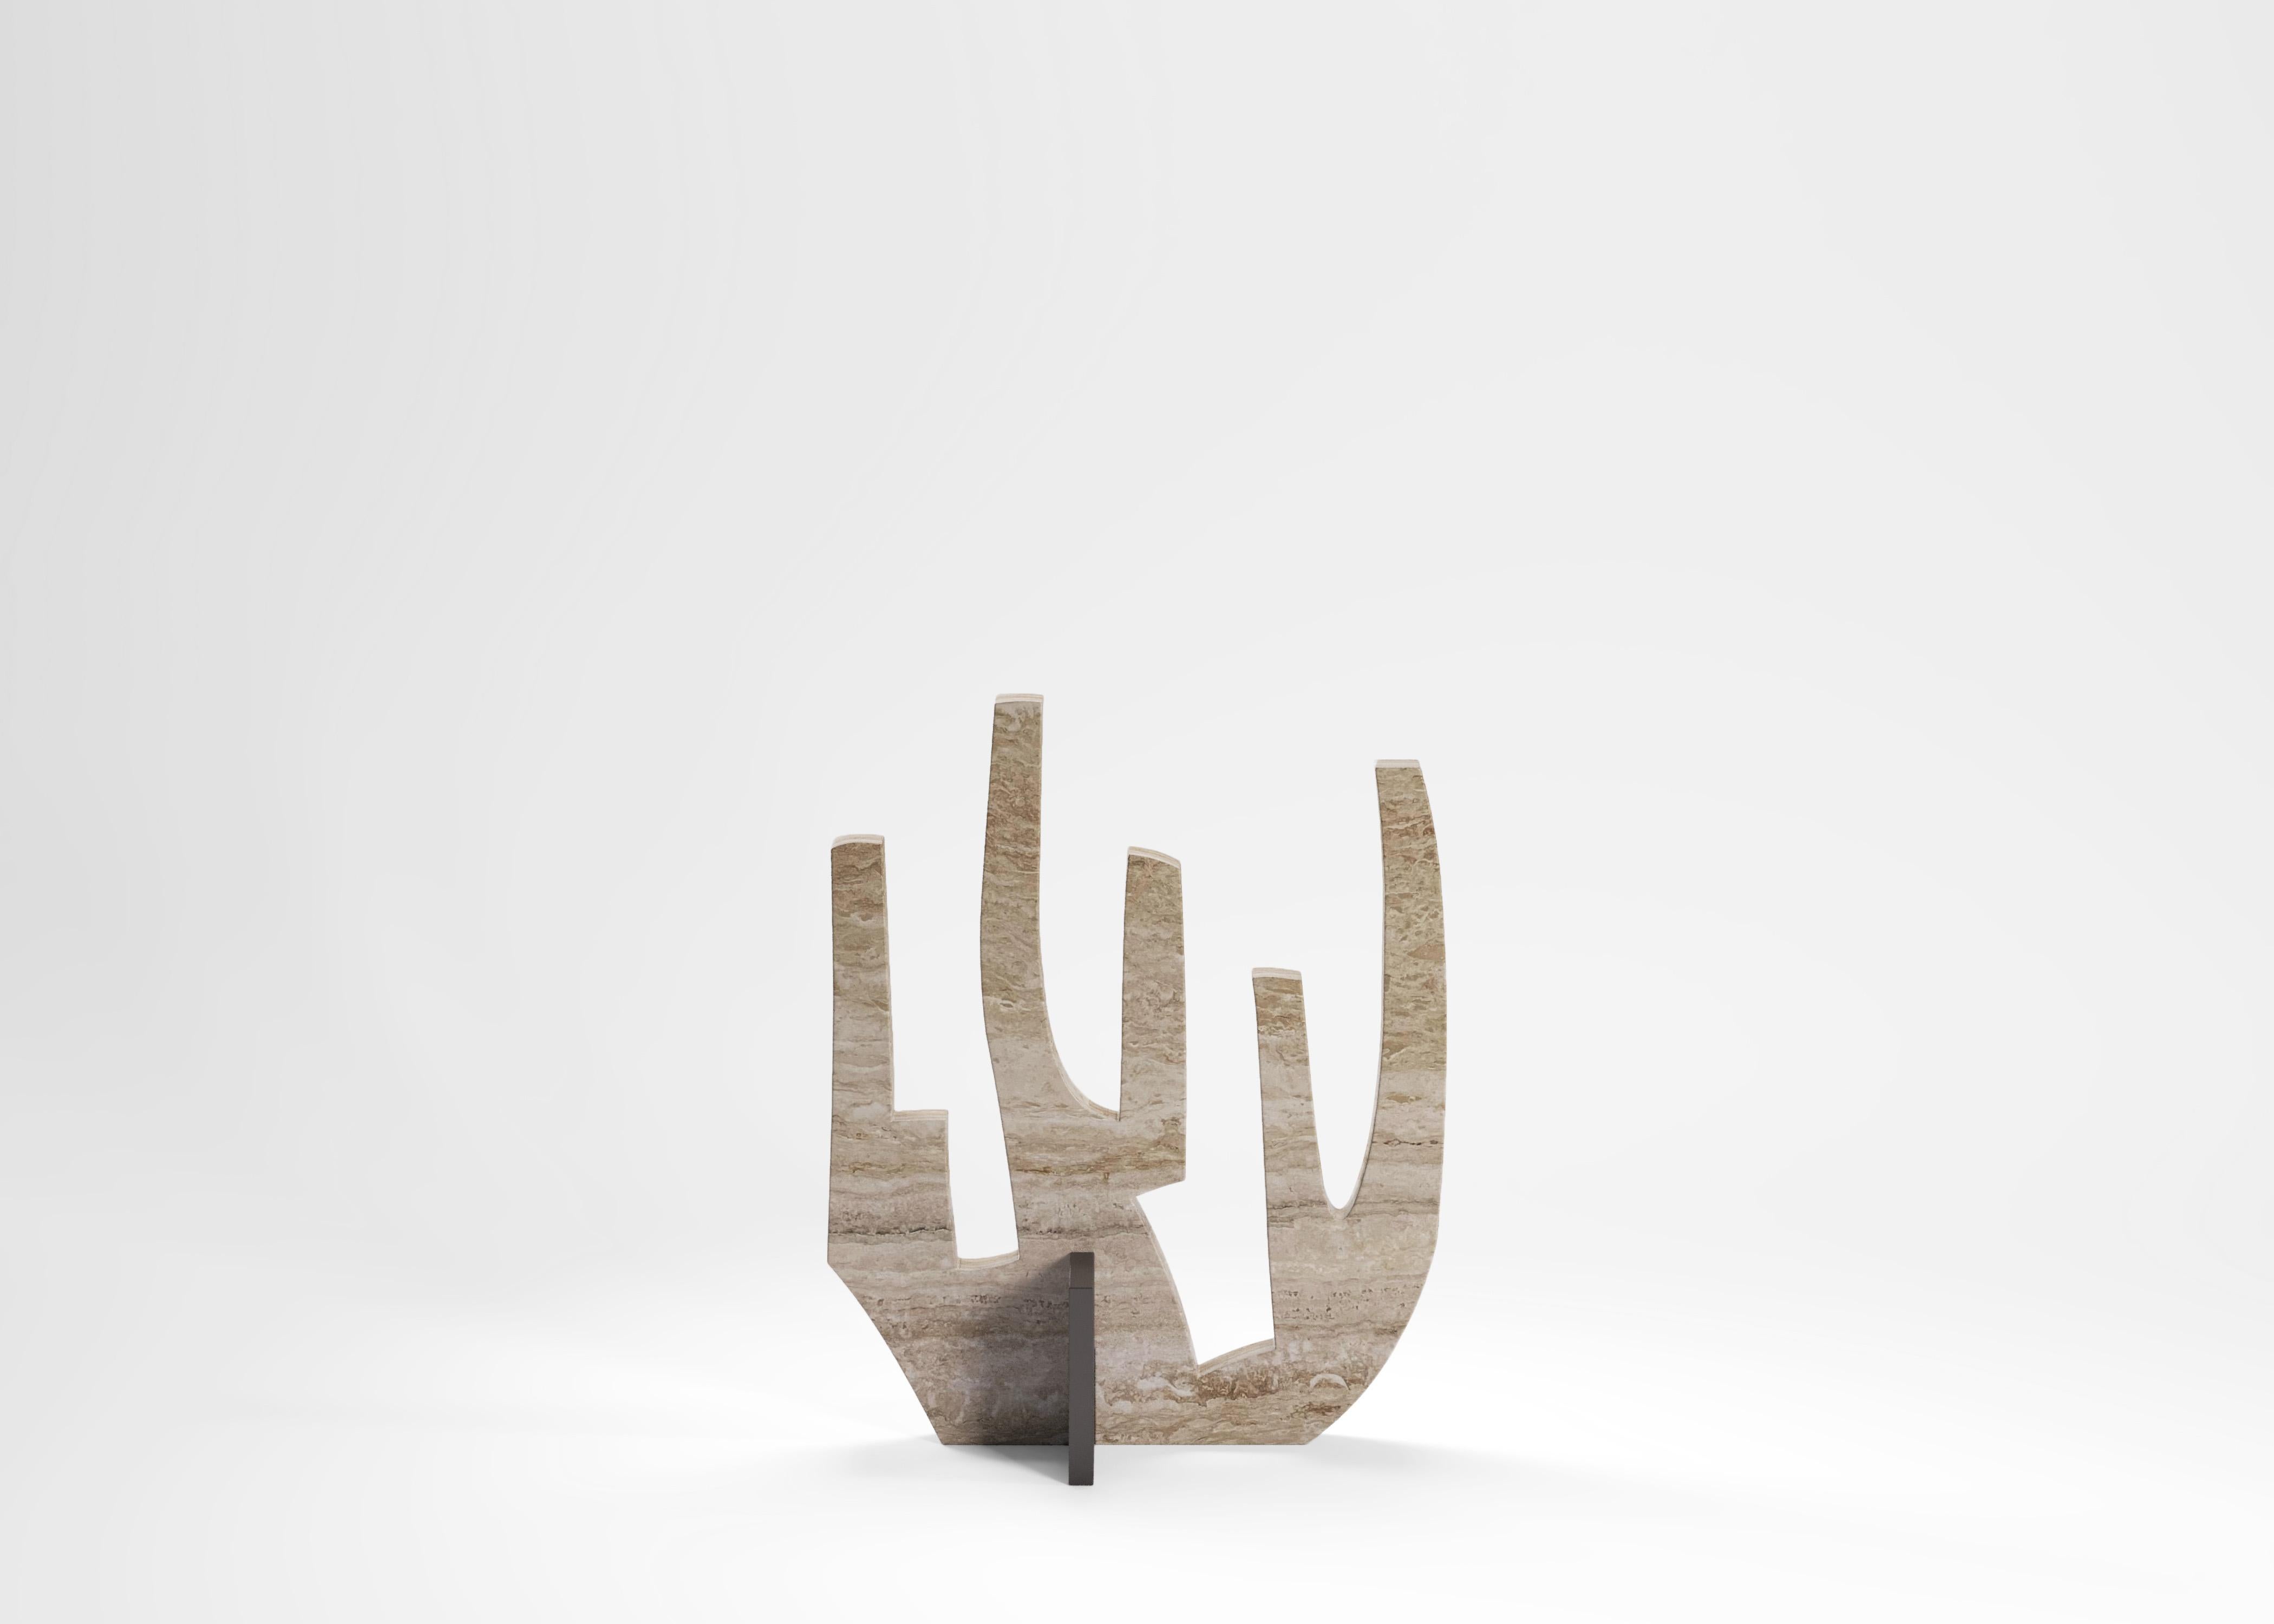 Coral sculpture by Edizione Limitata
Limited edition of 150 pieces. Signed and numbered.
Designers: Simone Fanciullacci 
Dimensions: H 30 × W 12 × L 25 cm
Materials: Travertine and metal

Edizione Limitata, that is to say “Limited Edition”, is